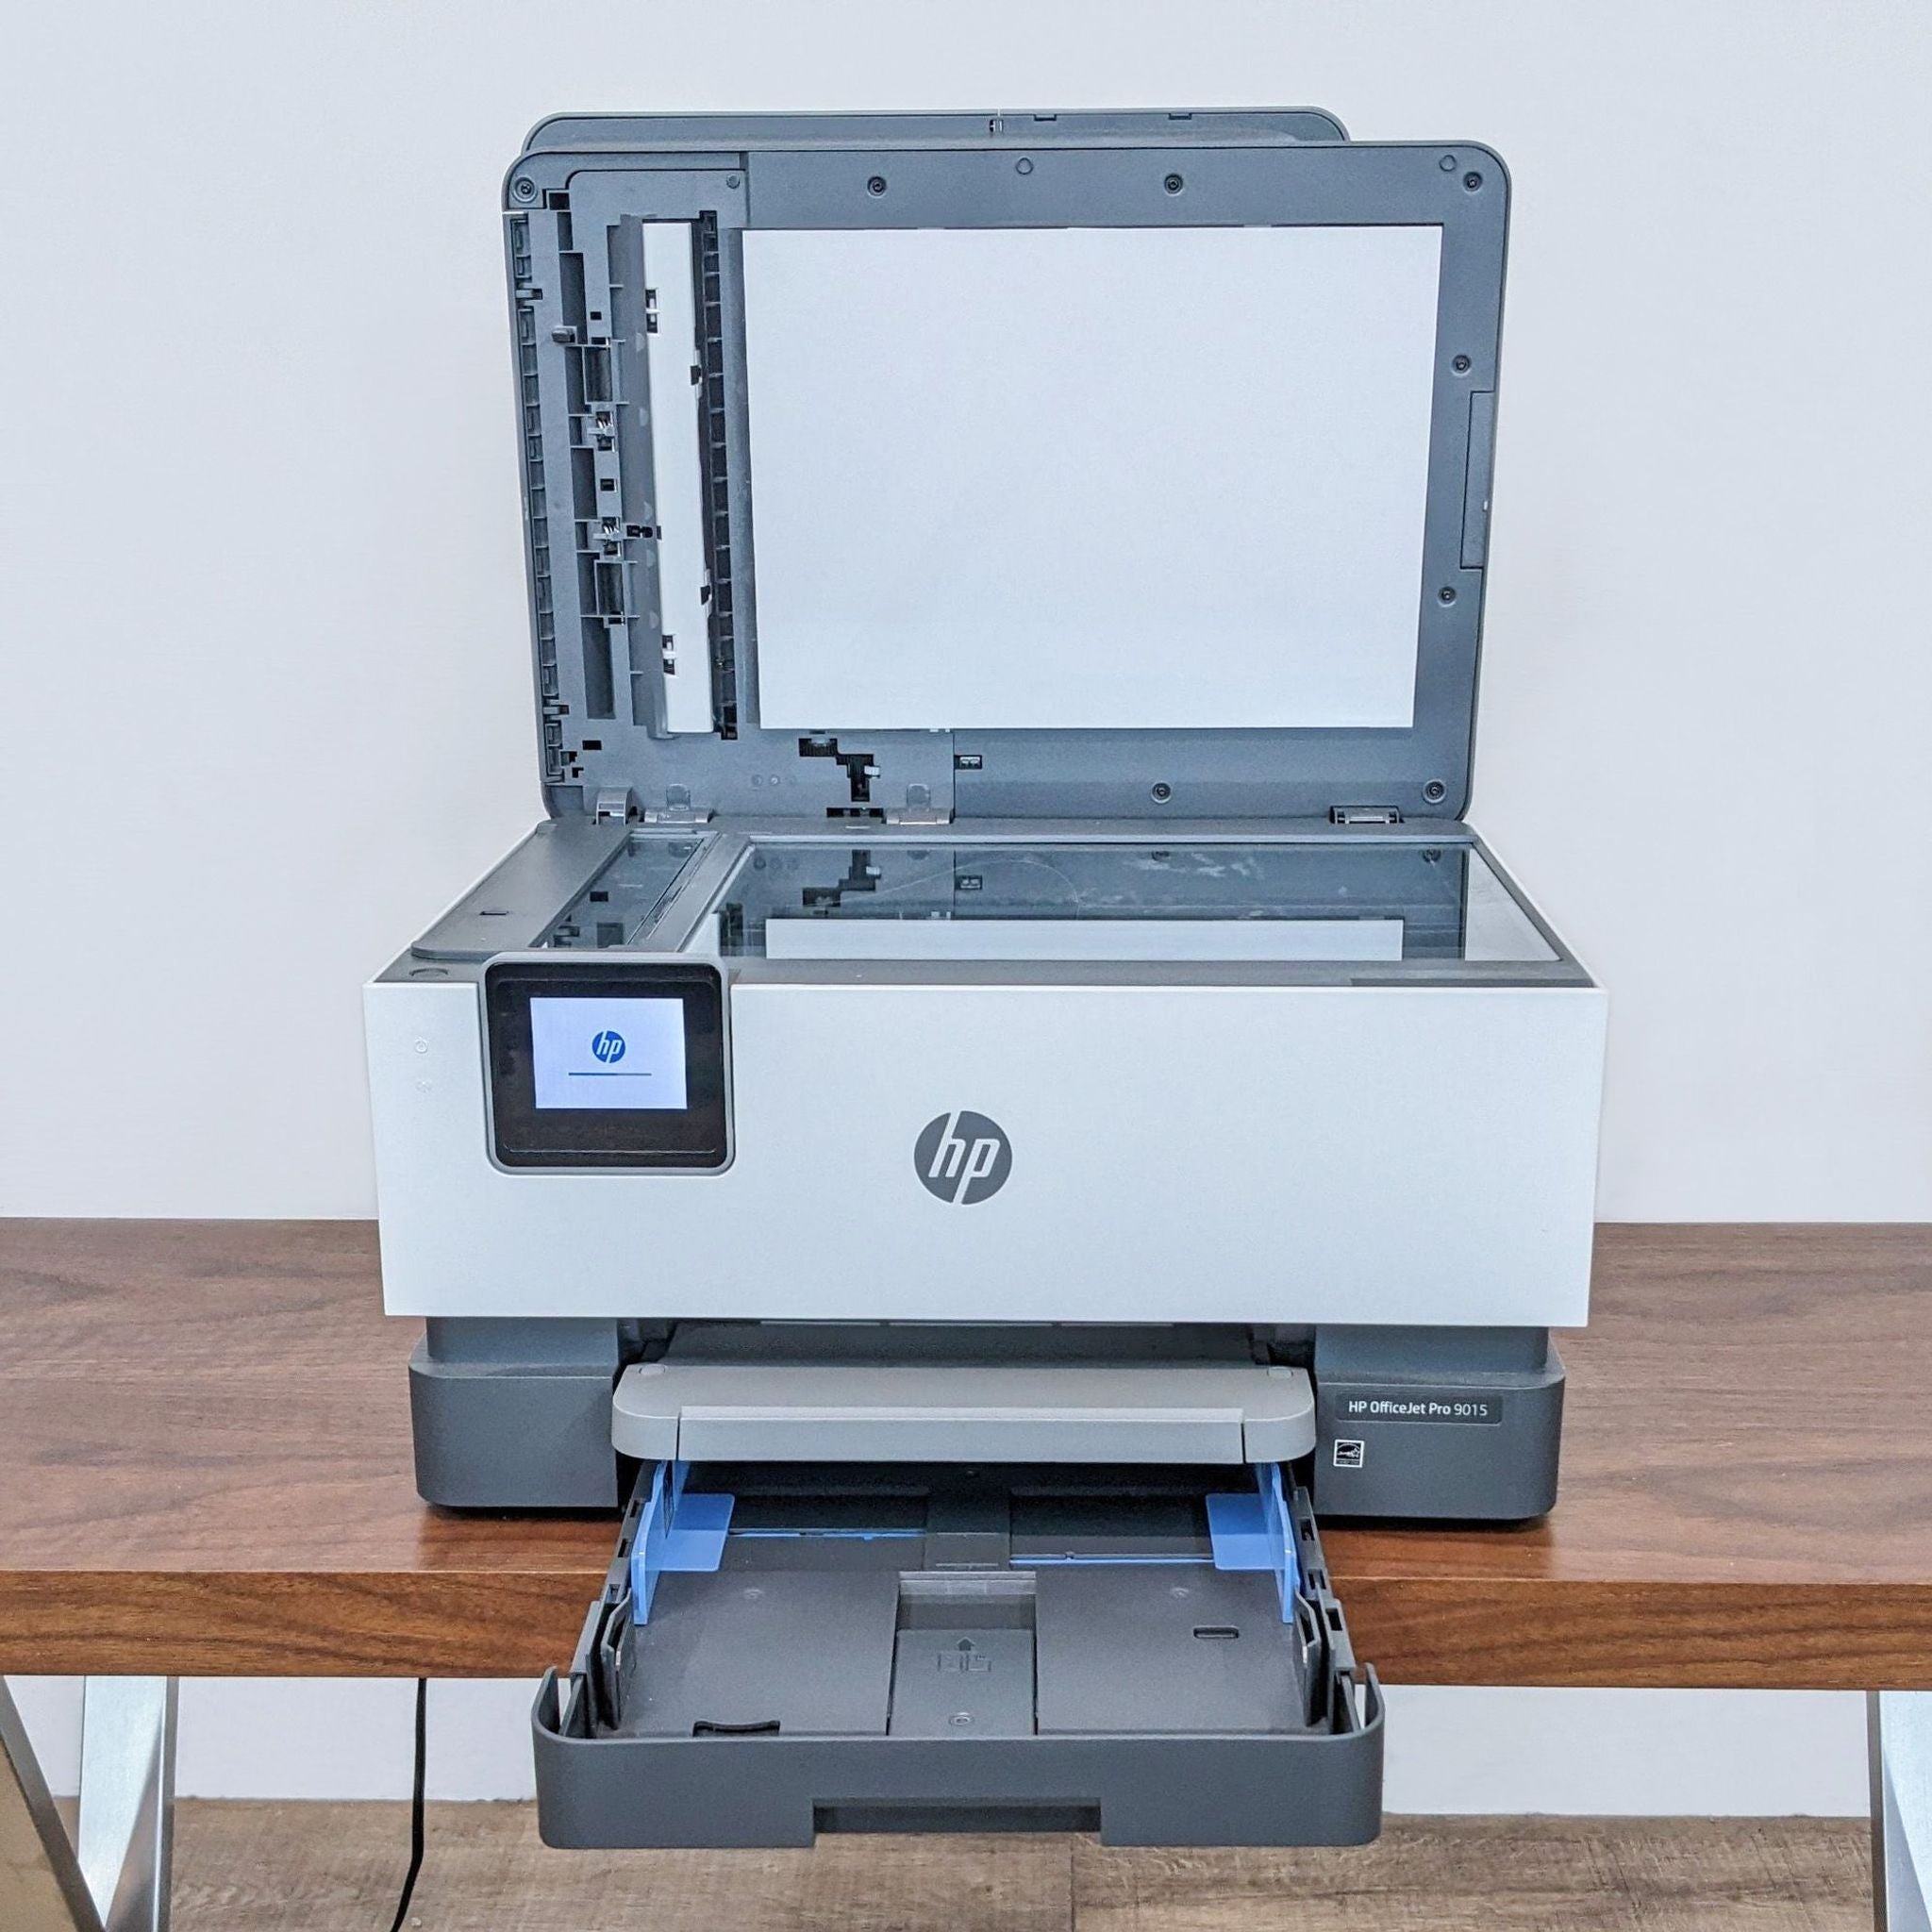 HP all-in-one printer on a desk with the scanning lid open and paper tray extended, ideal for a home office.